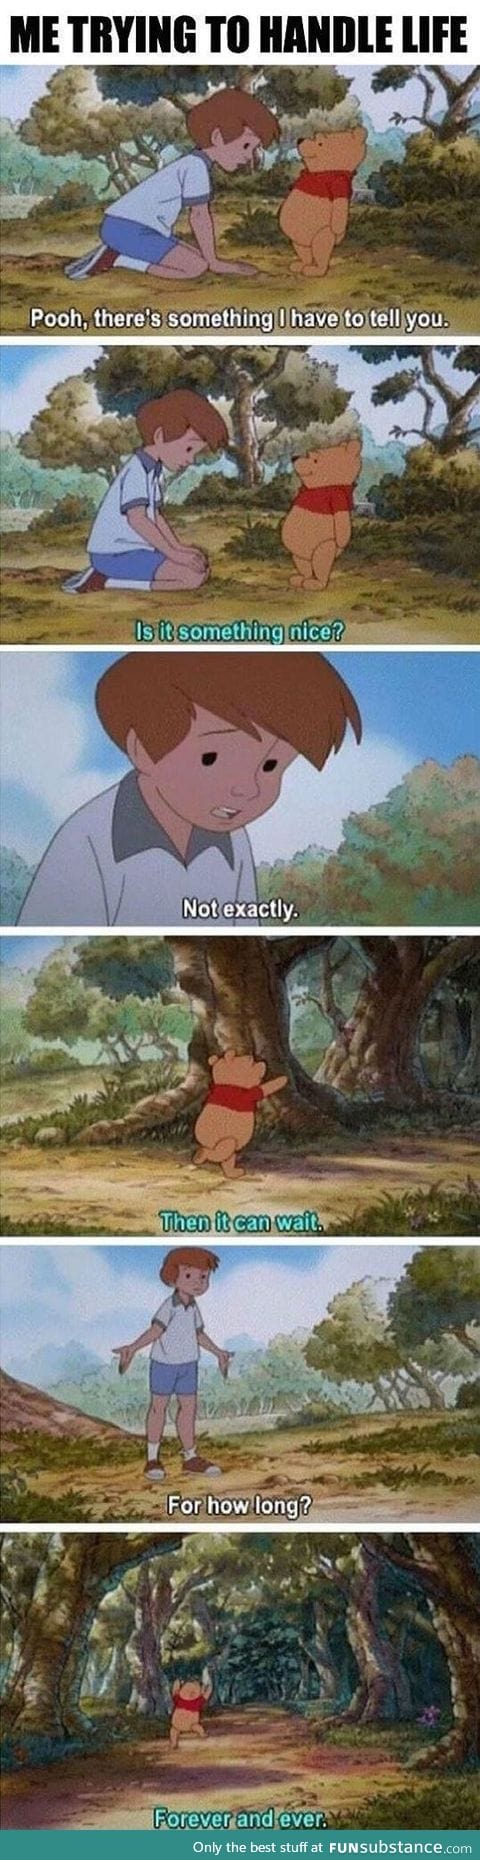 I deeply empathize with Pooh